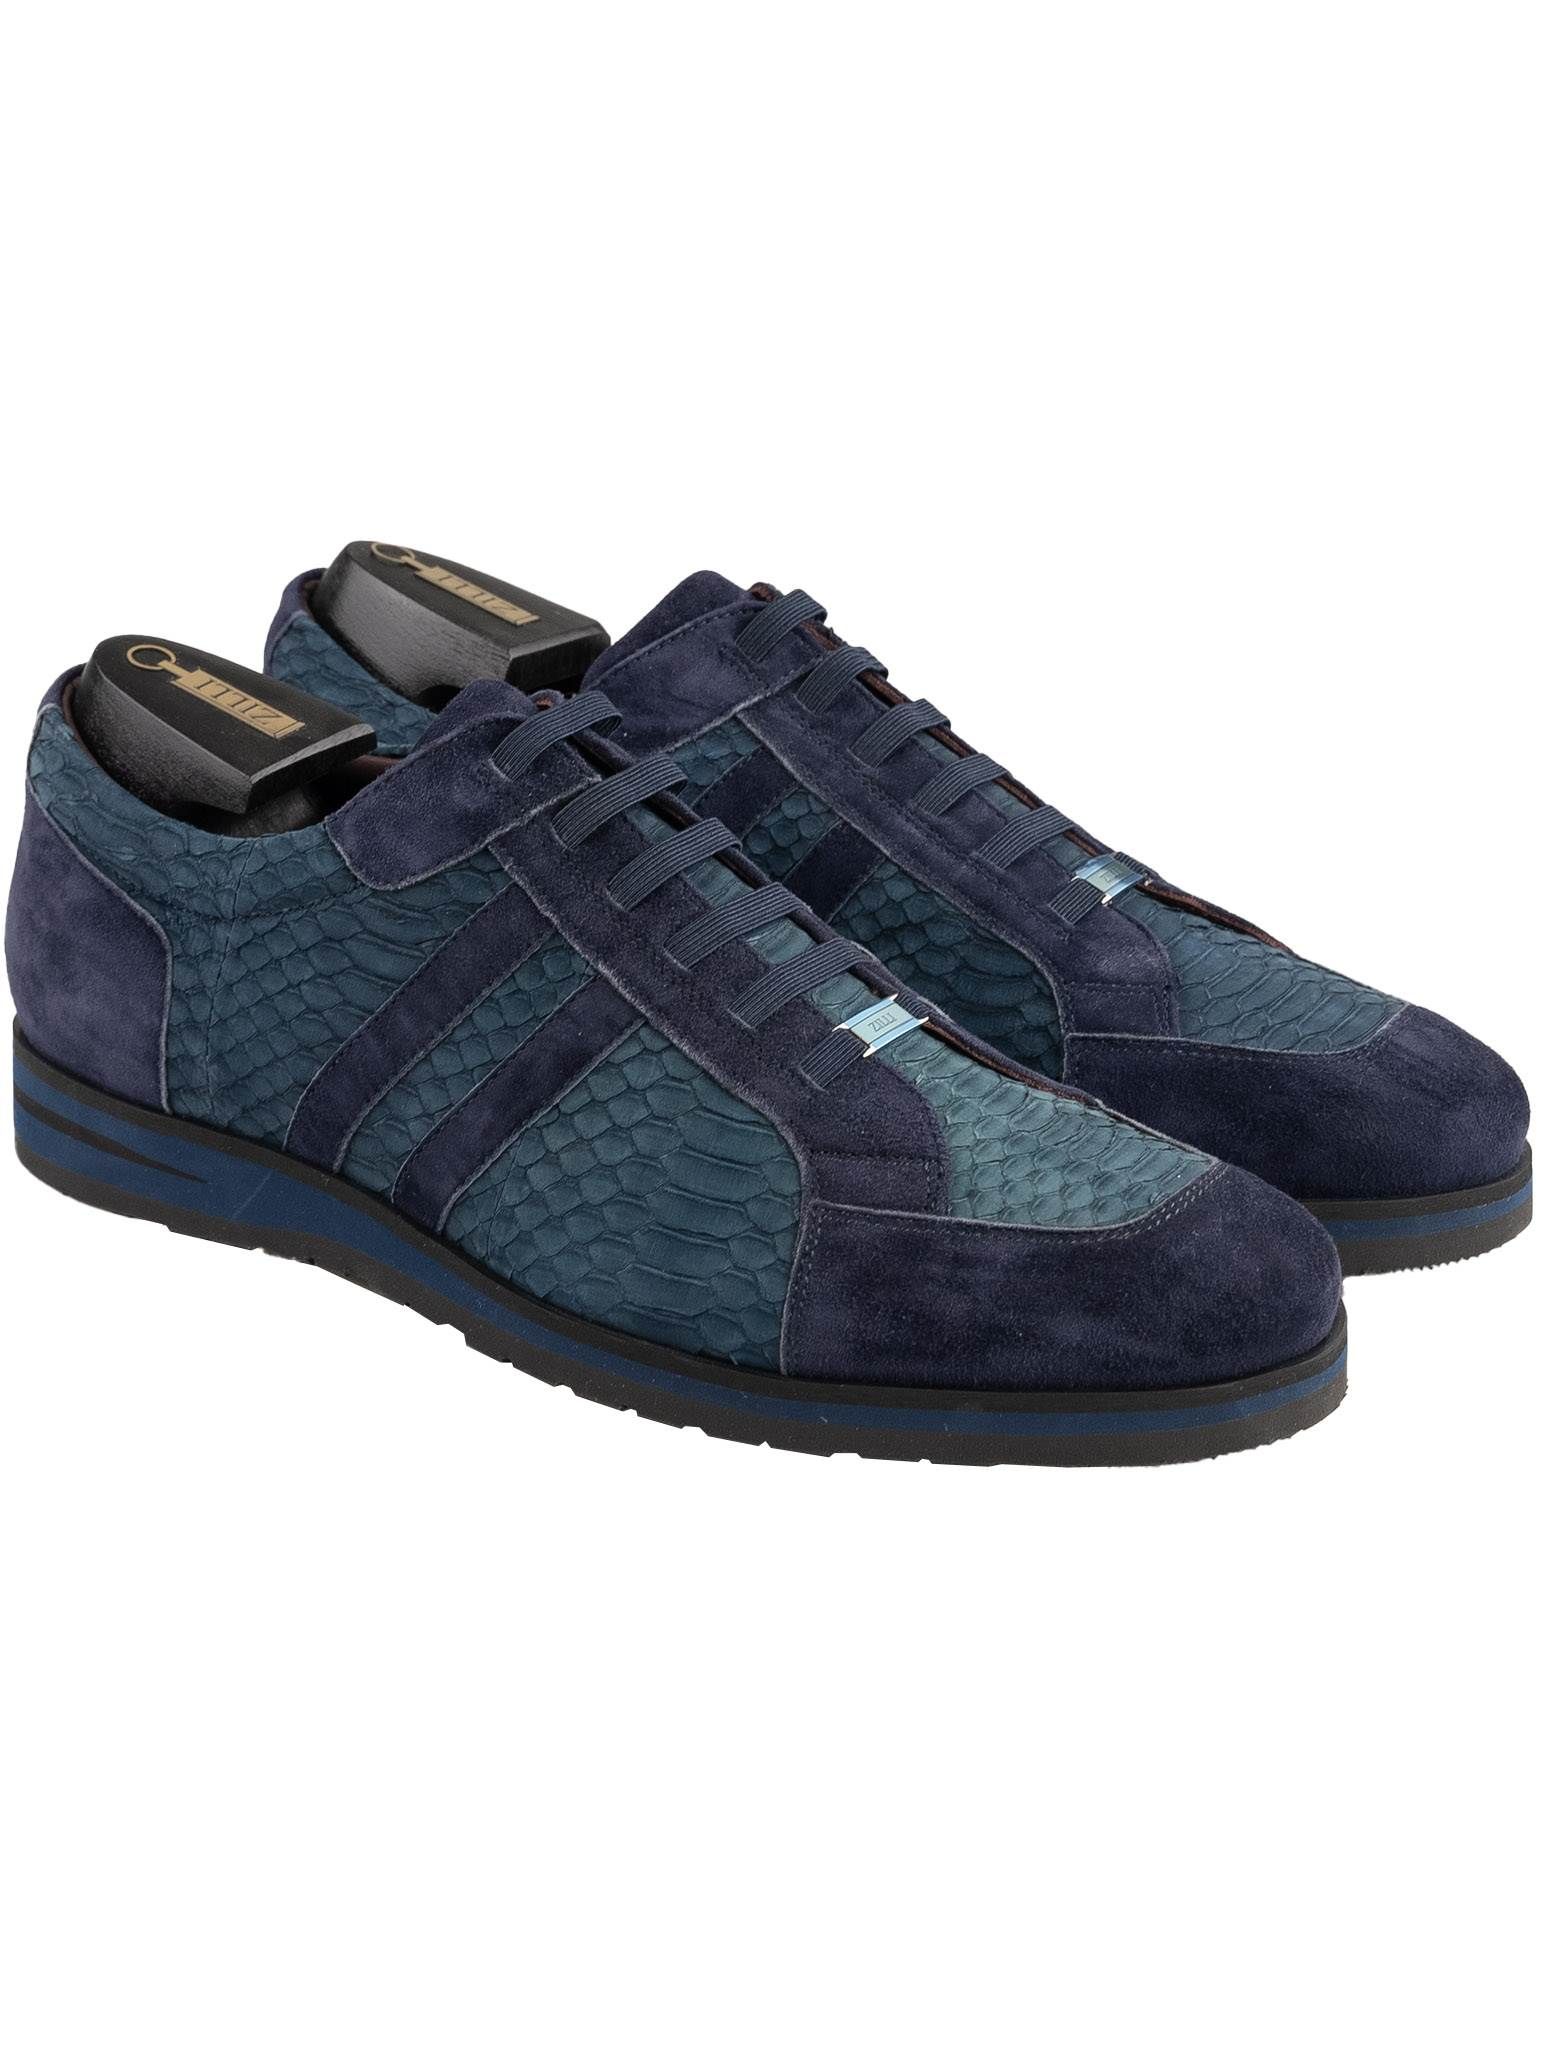 Zilli Blue Leather Snake Leather Suede Sneakers | IsuiT